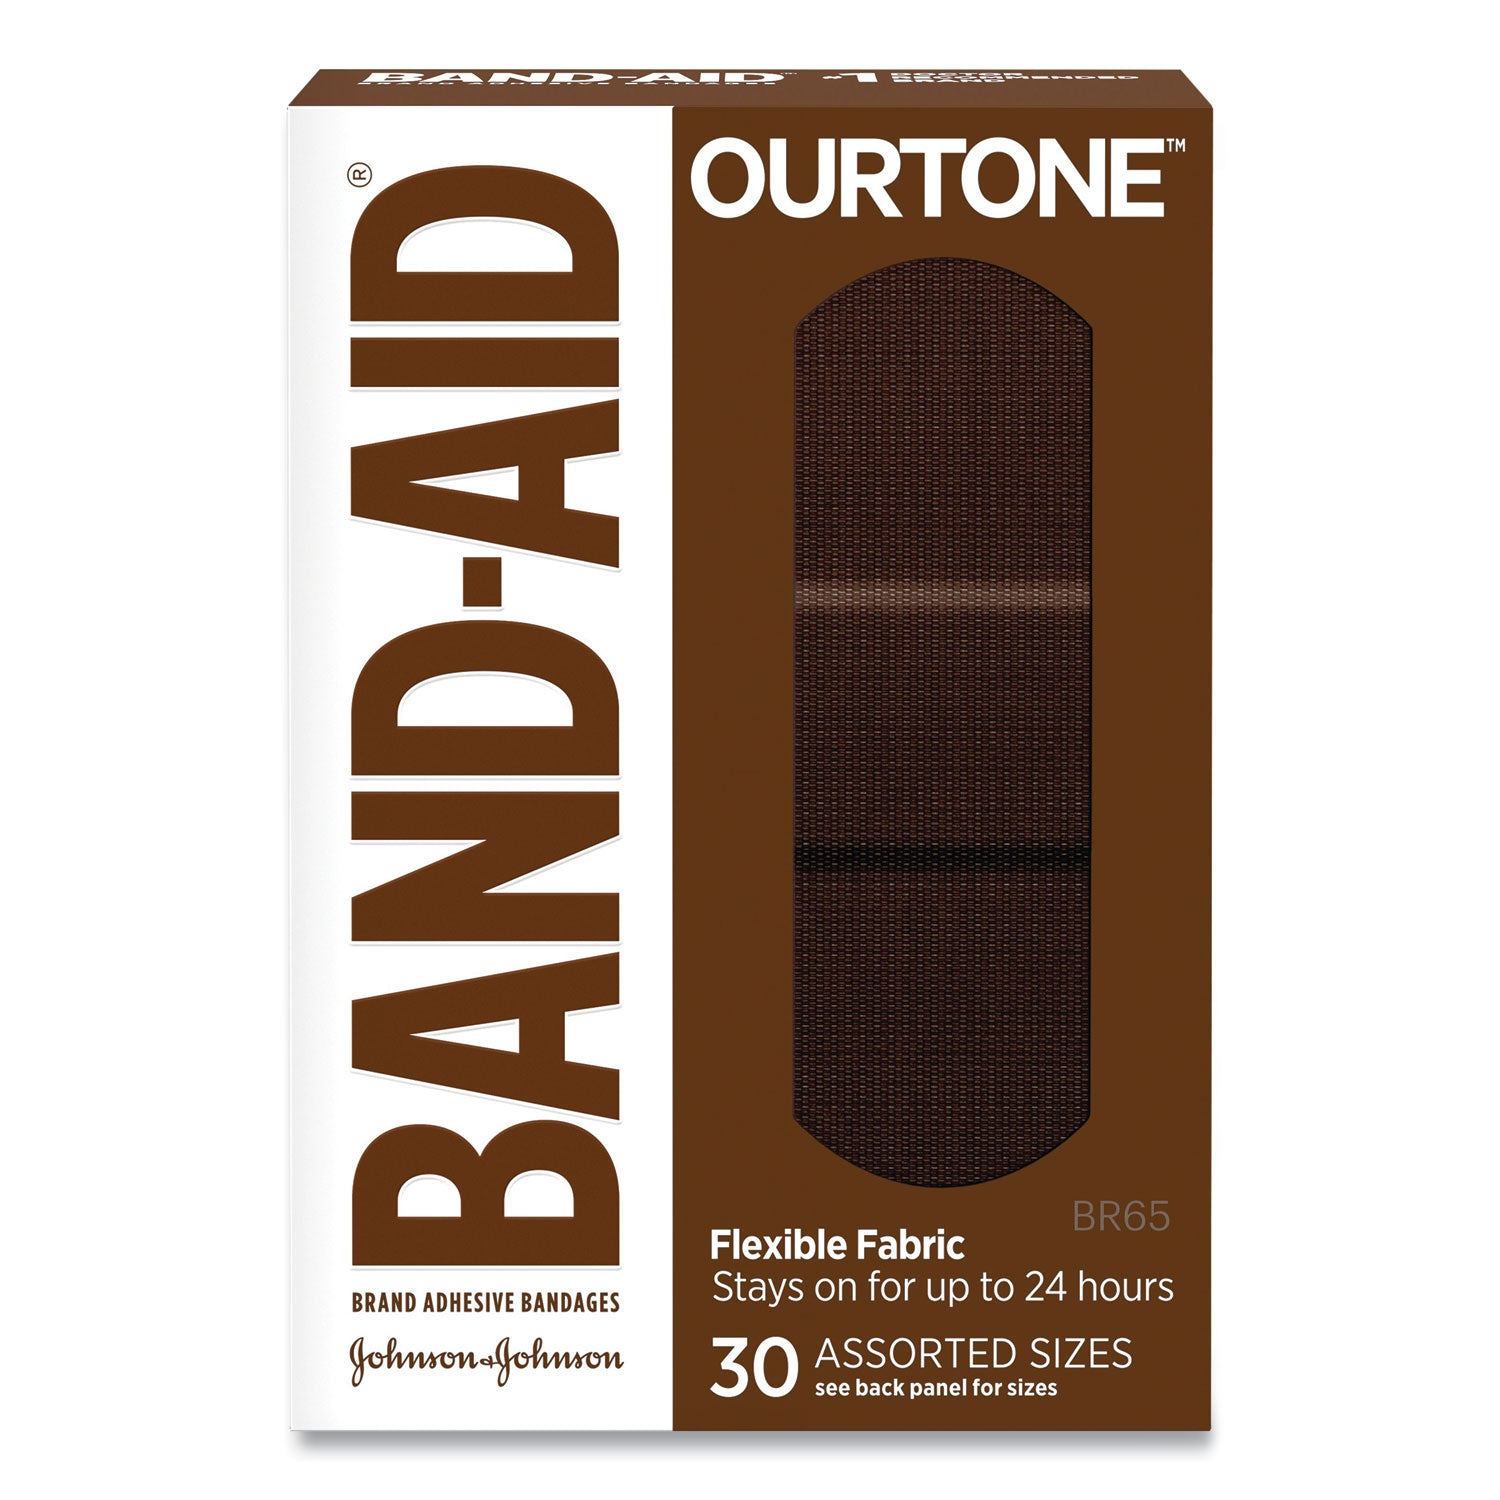 ourtone-adhesive-bandages-br65-225-x-063;-3-x-075;-3-x-1-deep-brown-30-pack_joj119587 - 1